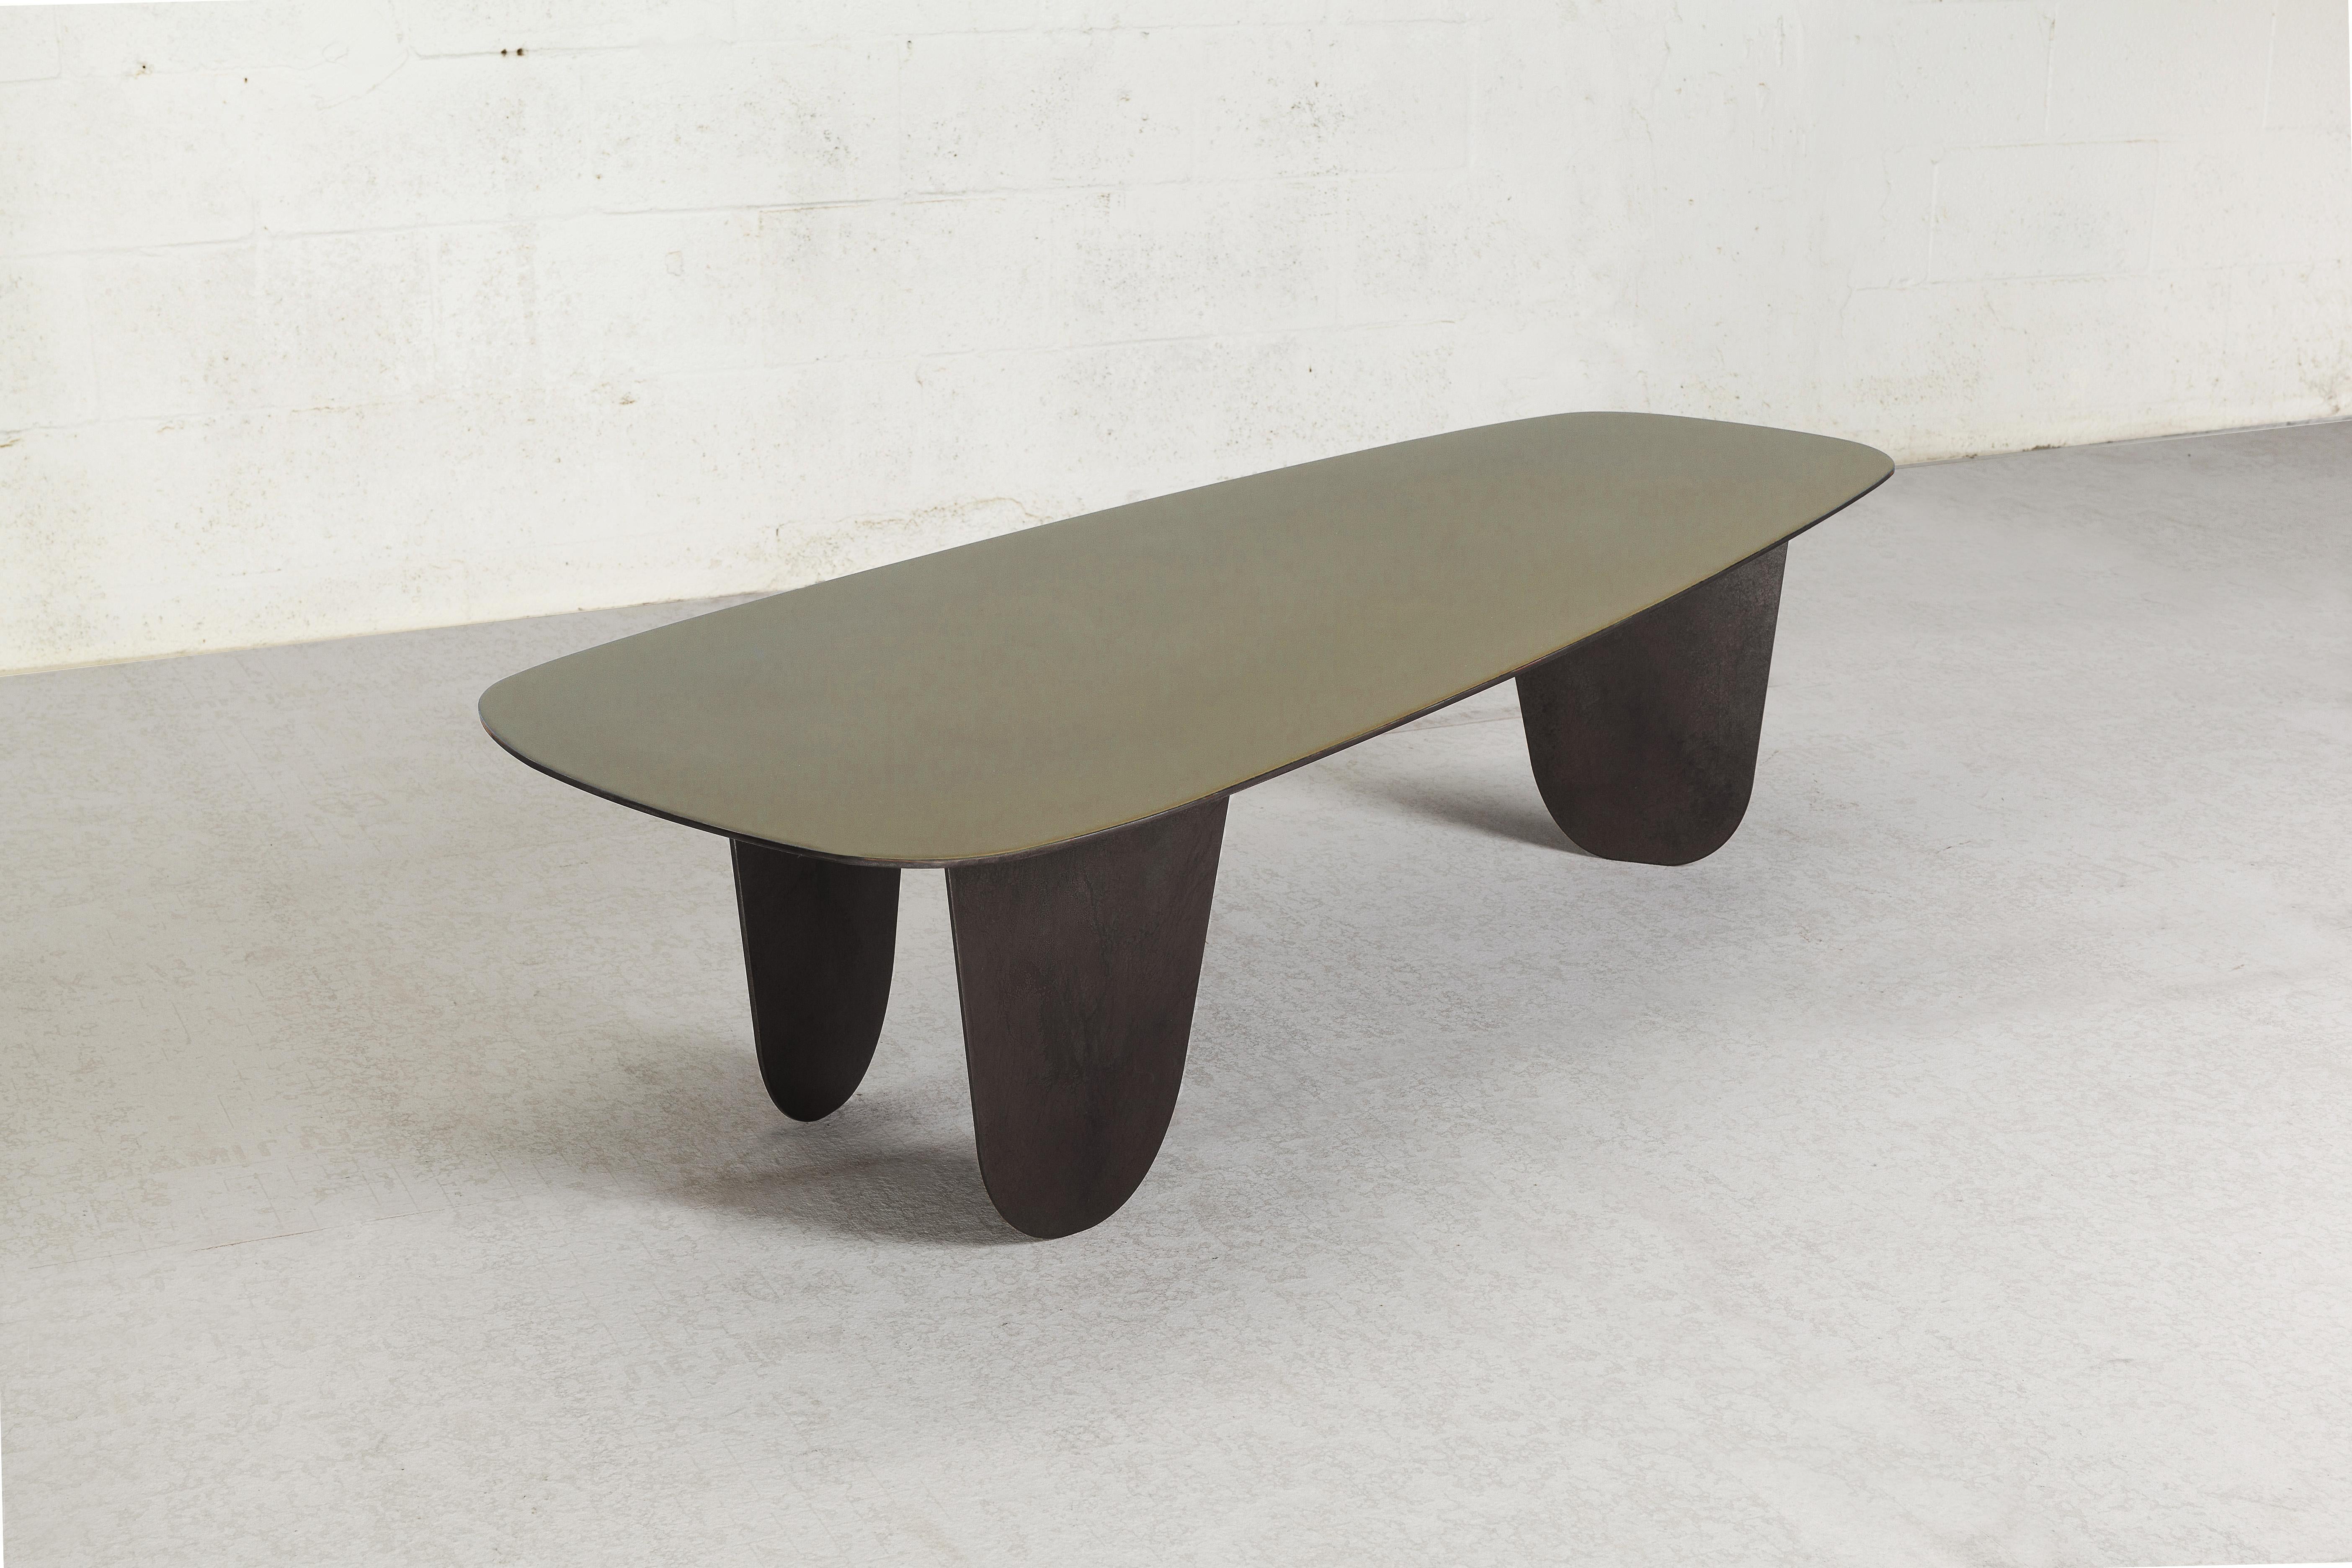 American Contemporary Freeform Minimalist Steel and Resin Low Tables by Vivian Carbonell For Sale